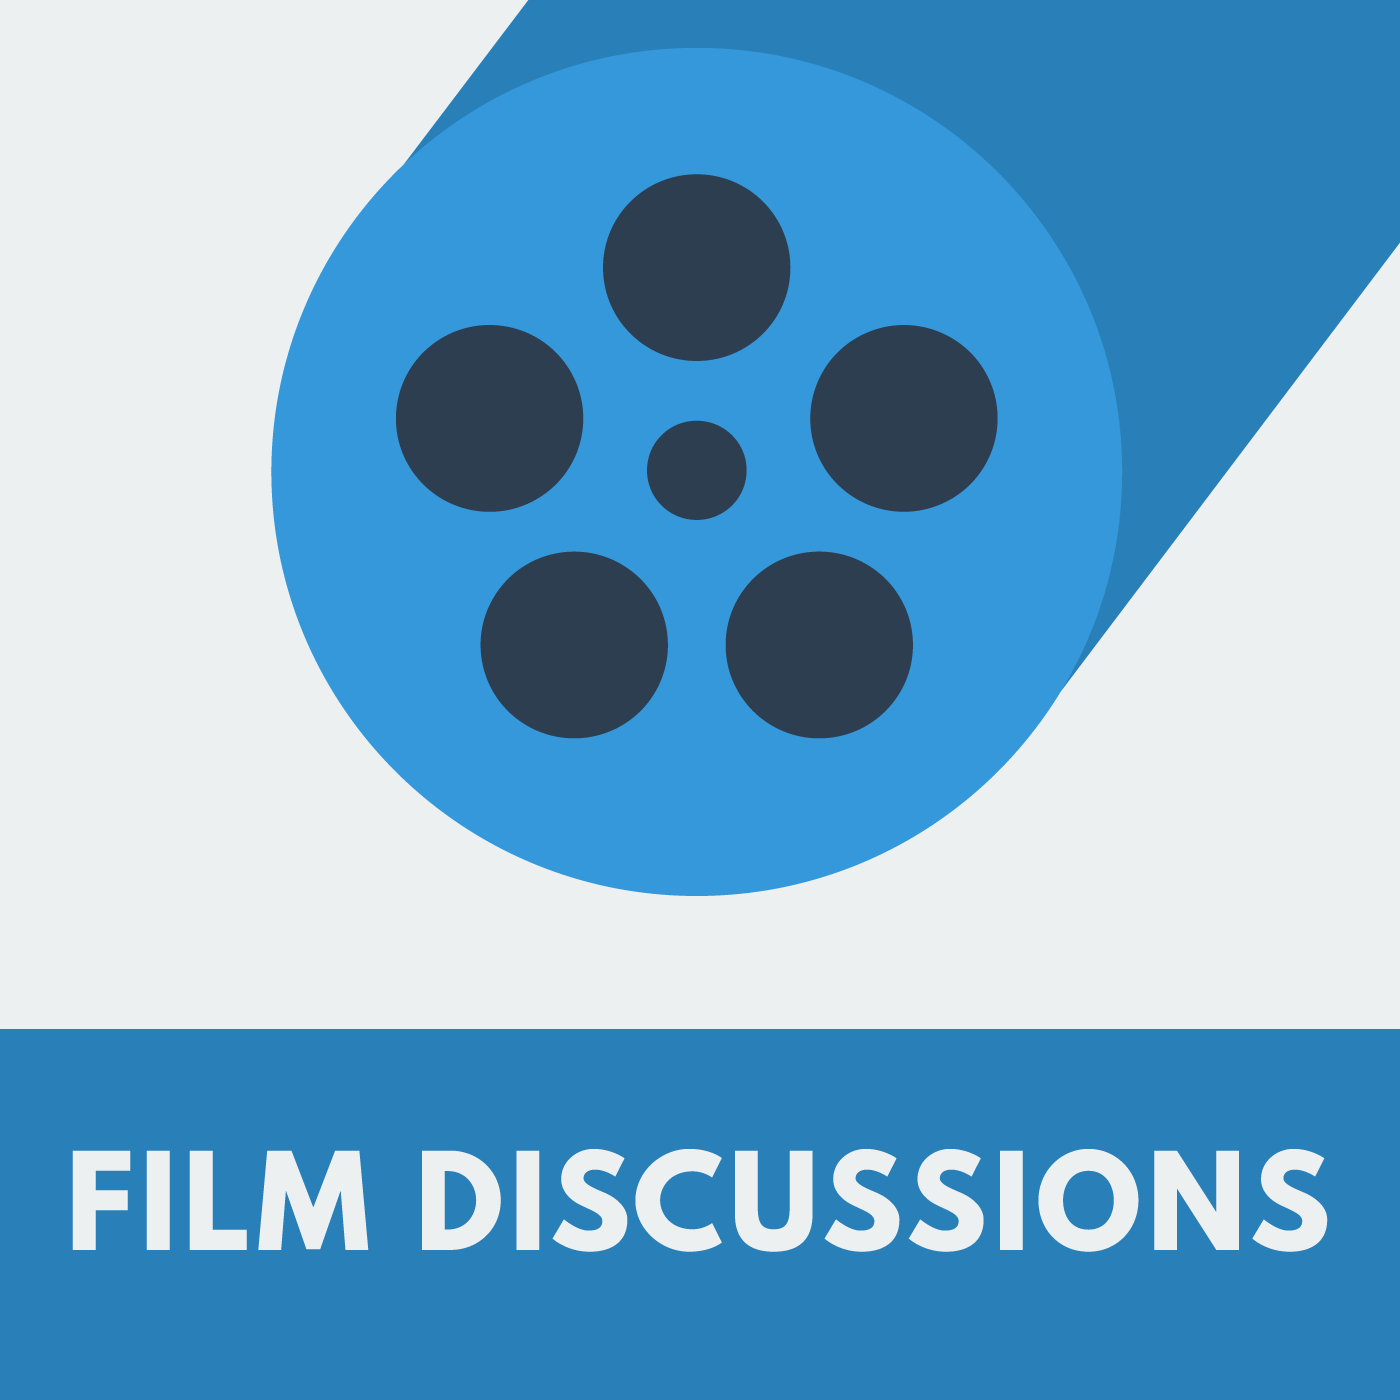 Film Discussions are now a Podcast!